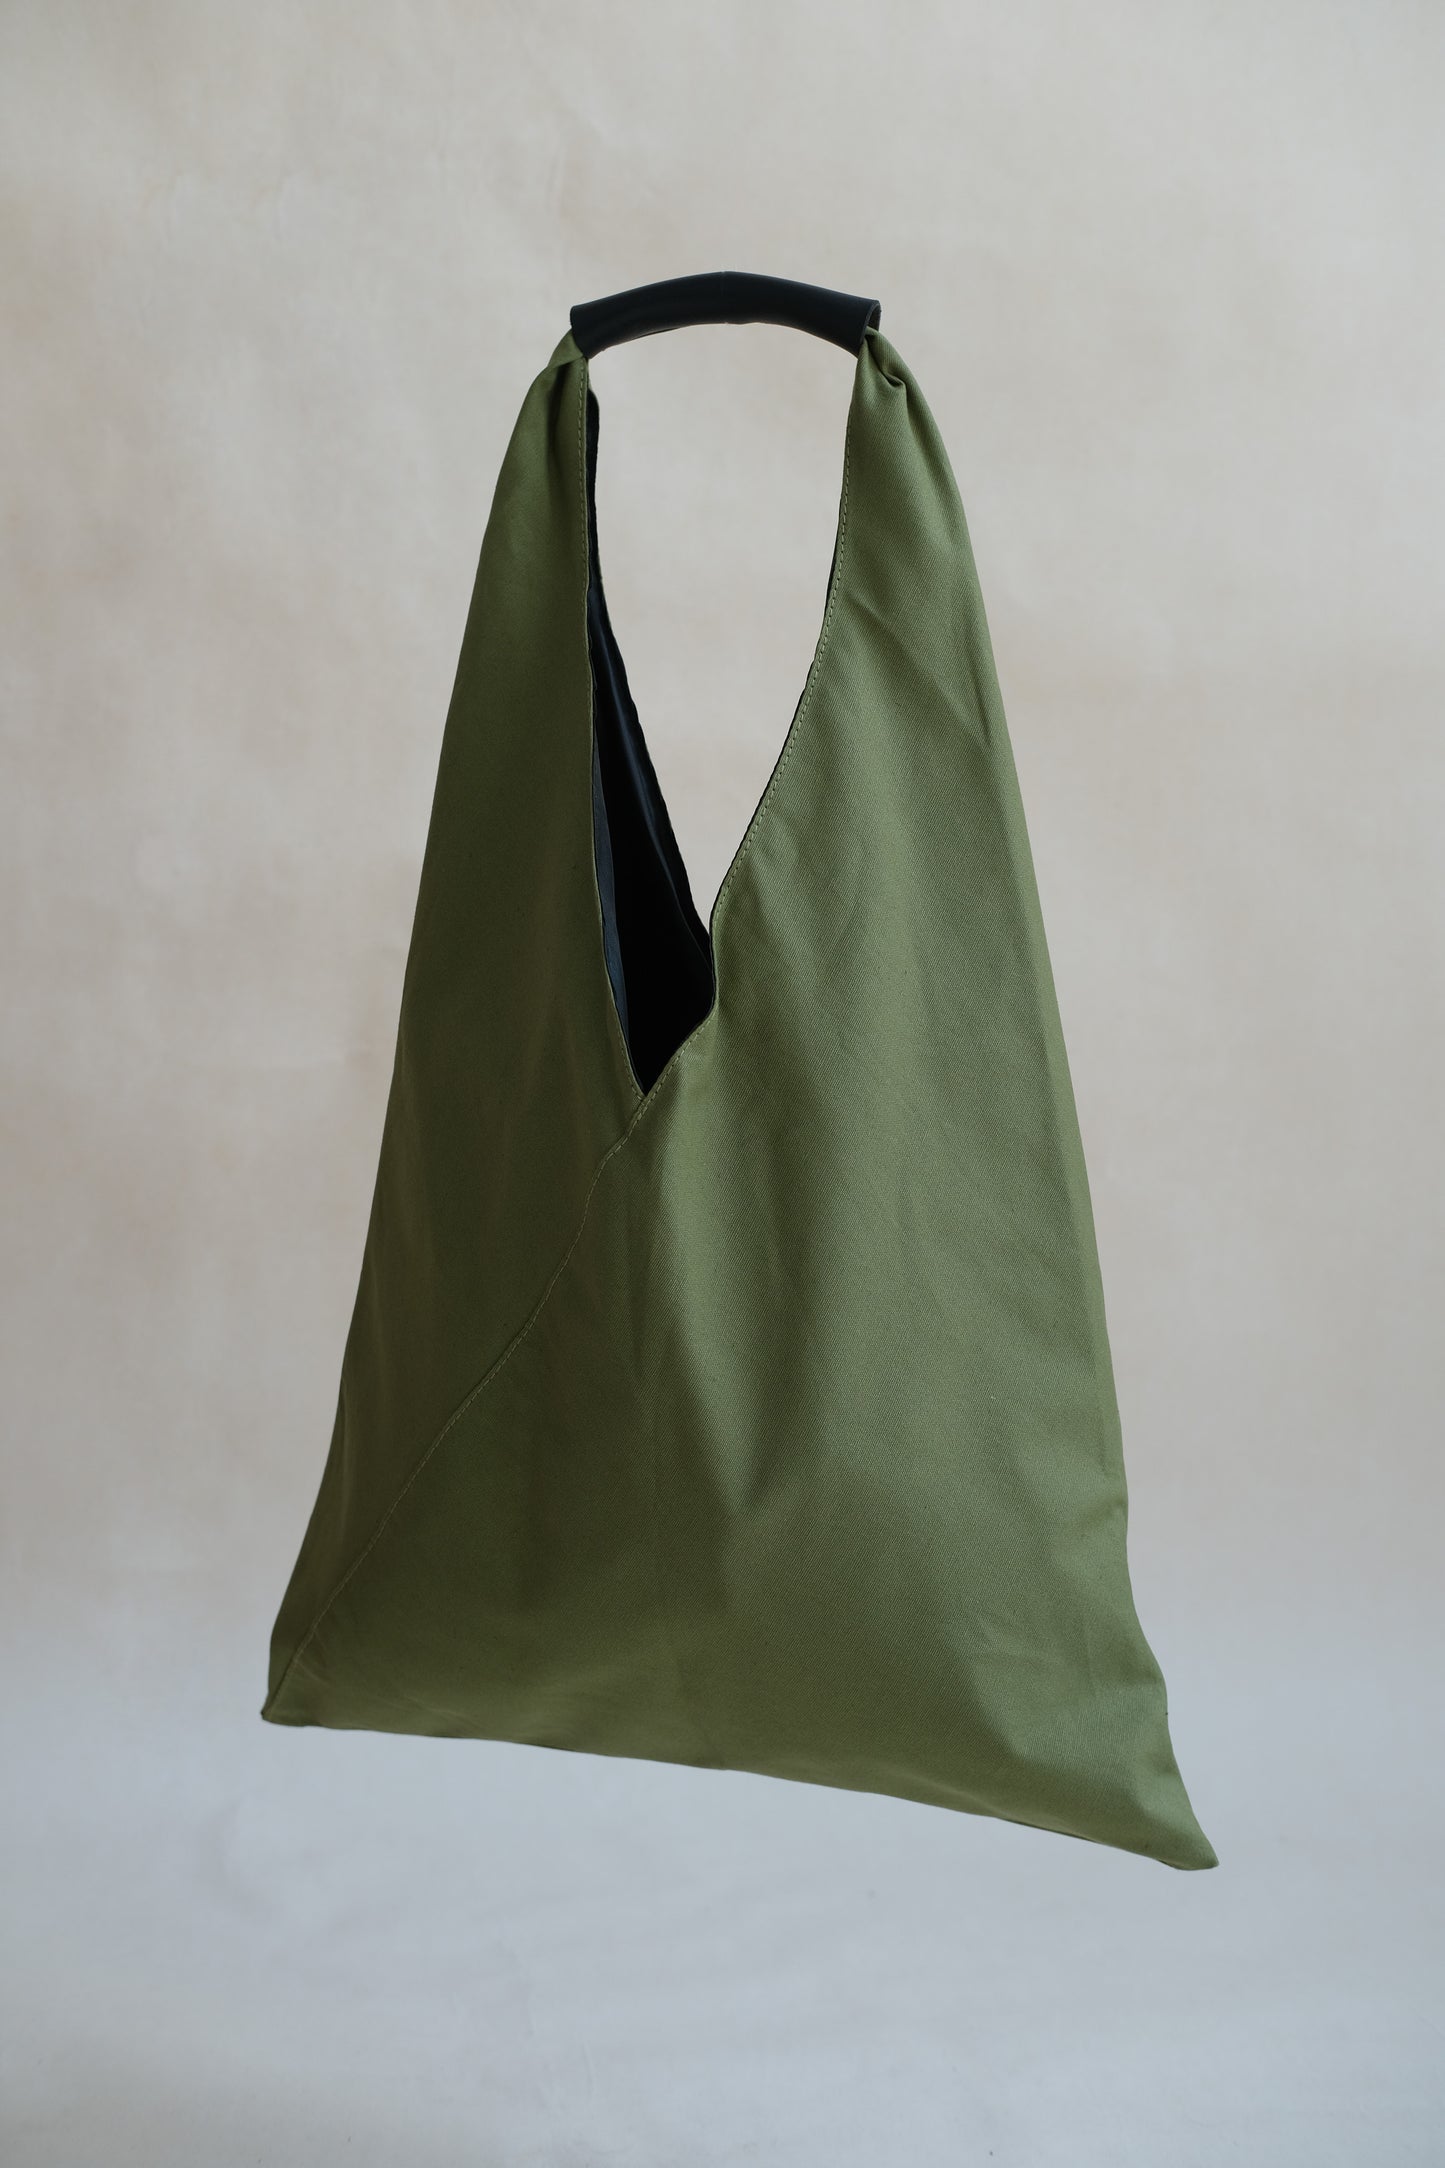 Panels of casual canvas bag in army green